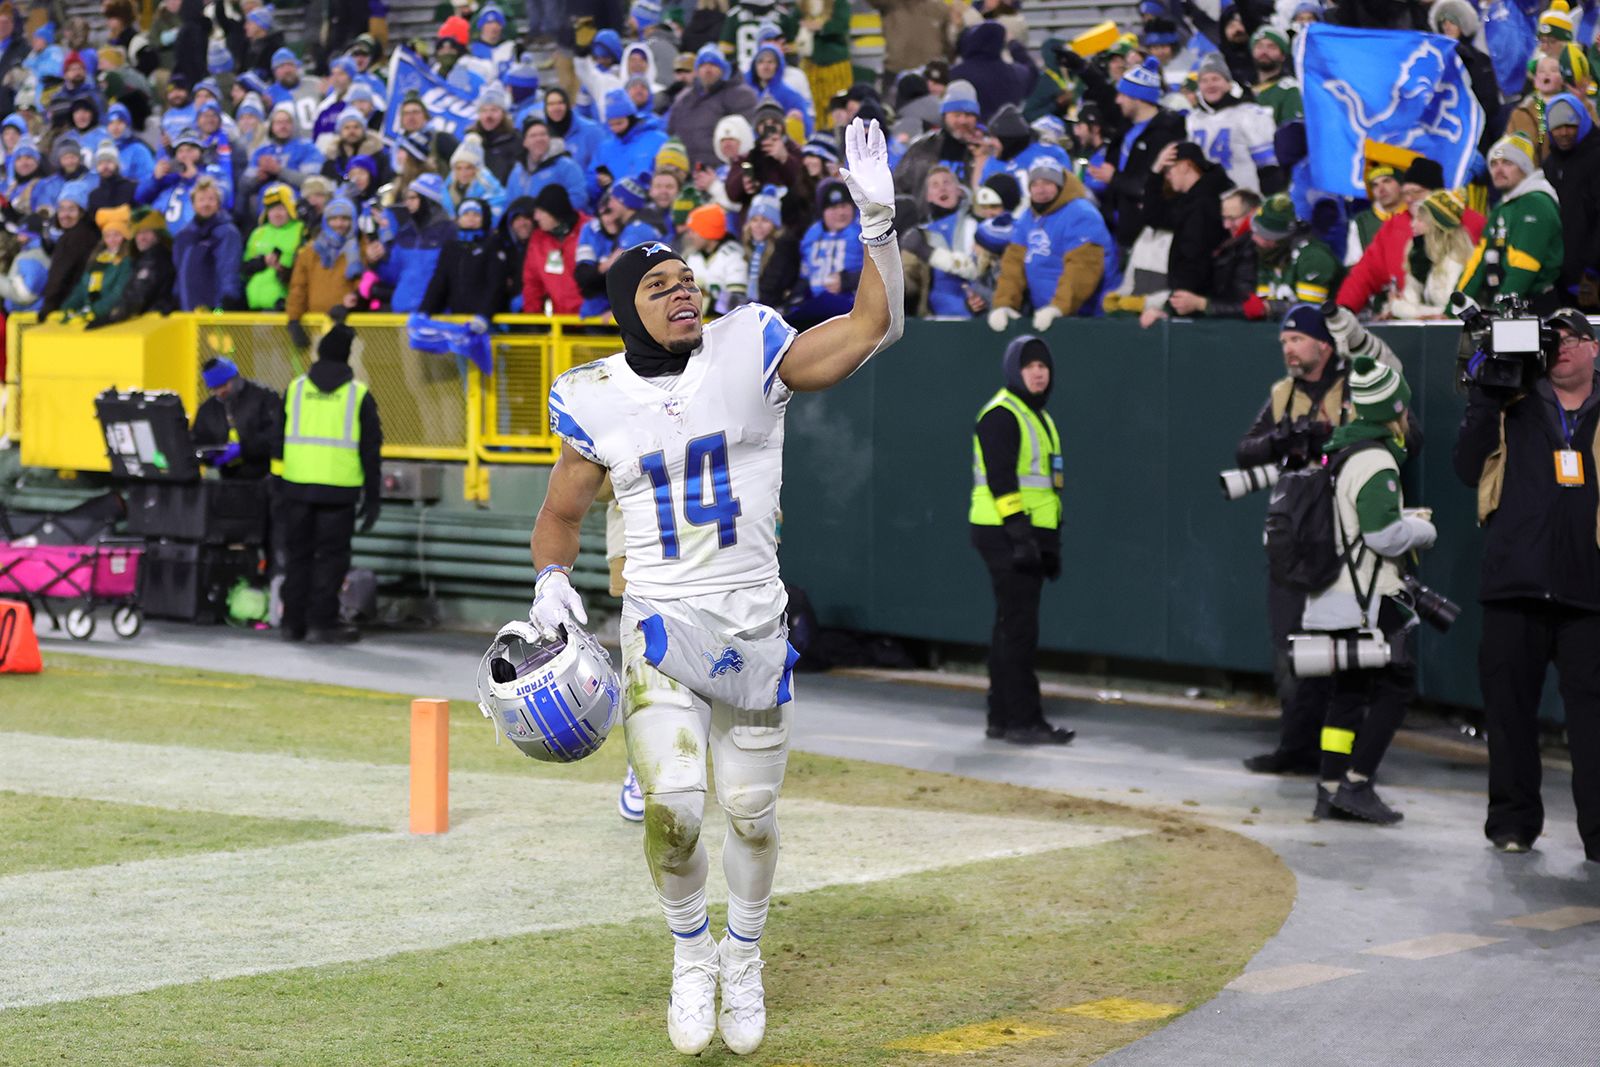 NFL playoffs set following Green Bay Packers loss to the Detroit Lions